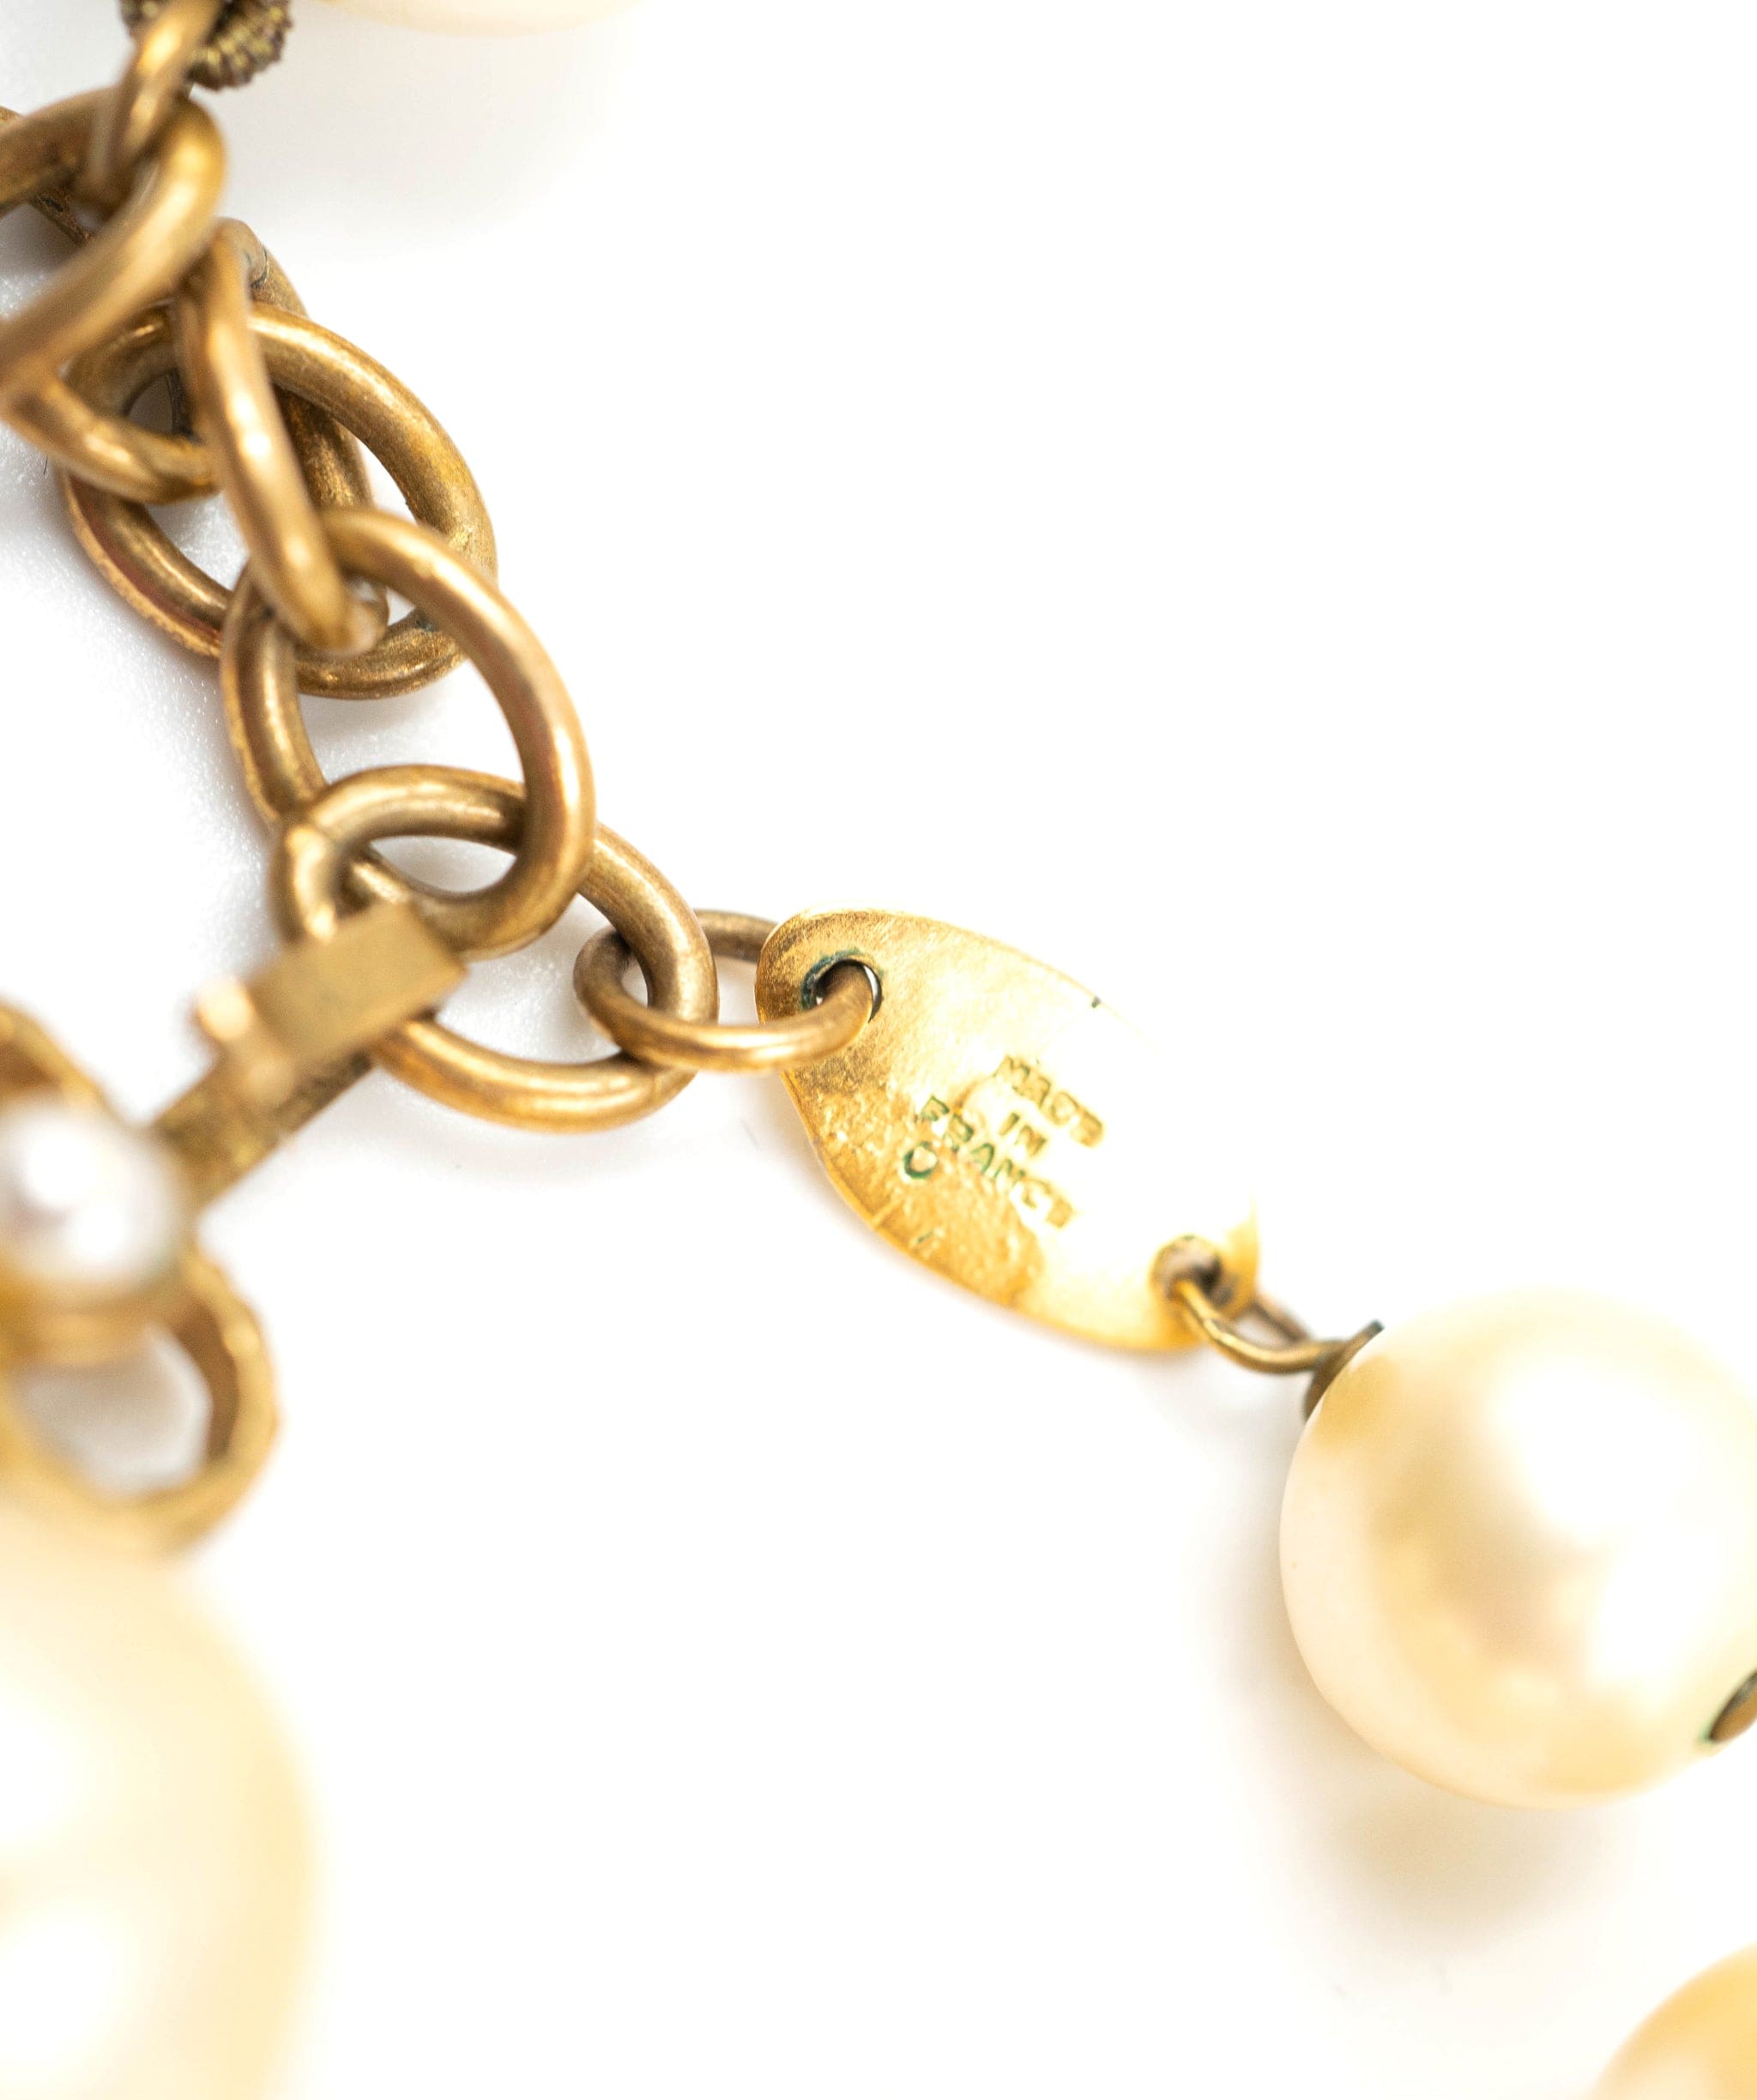 Chanel Chanel 1983 Pearl Necklace - AGL1663